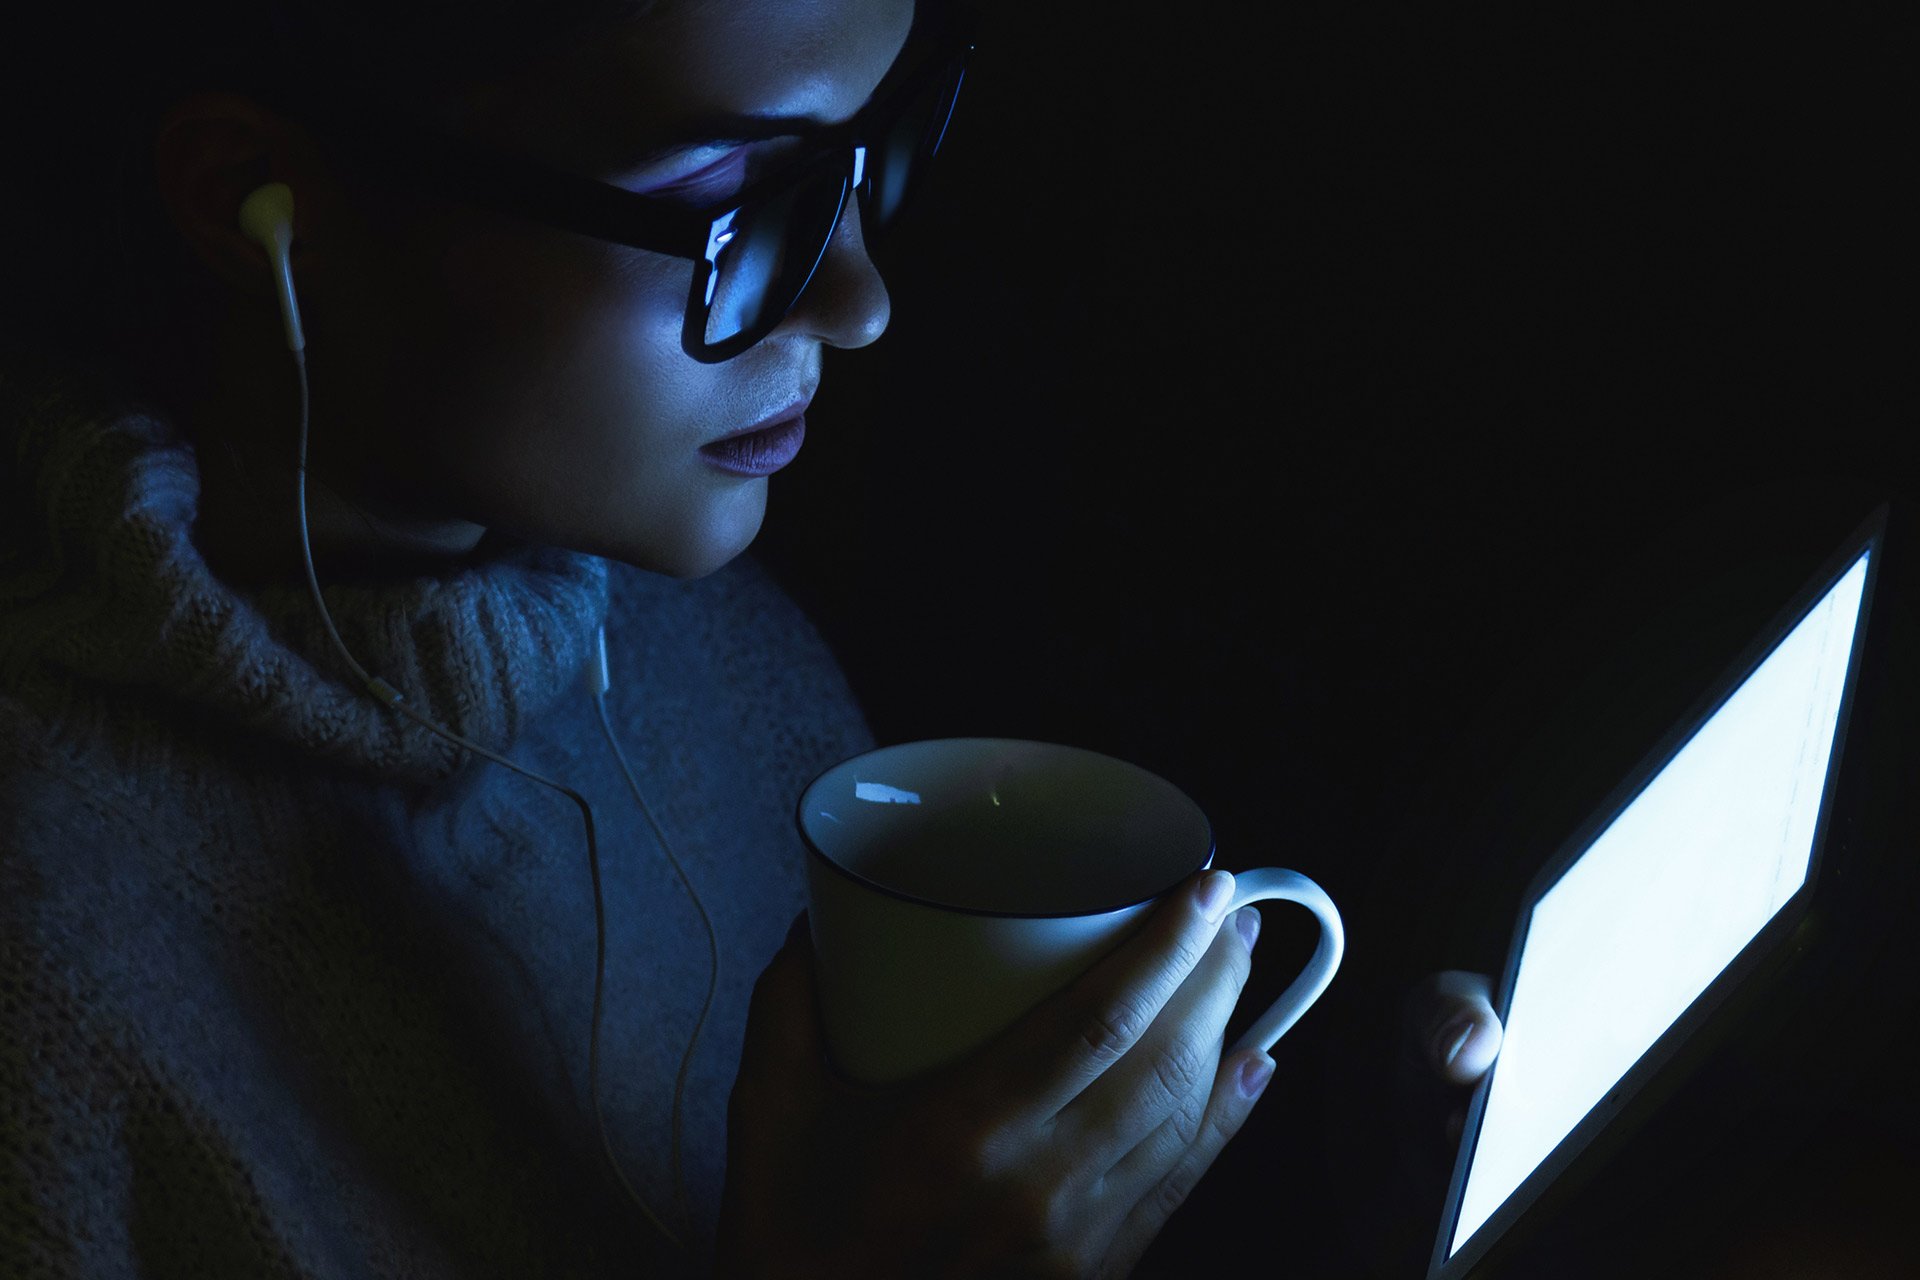 Almost all modern devices emit blue light, and it can increase the perceived symptoms of digital eyestrain.